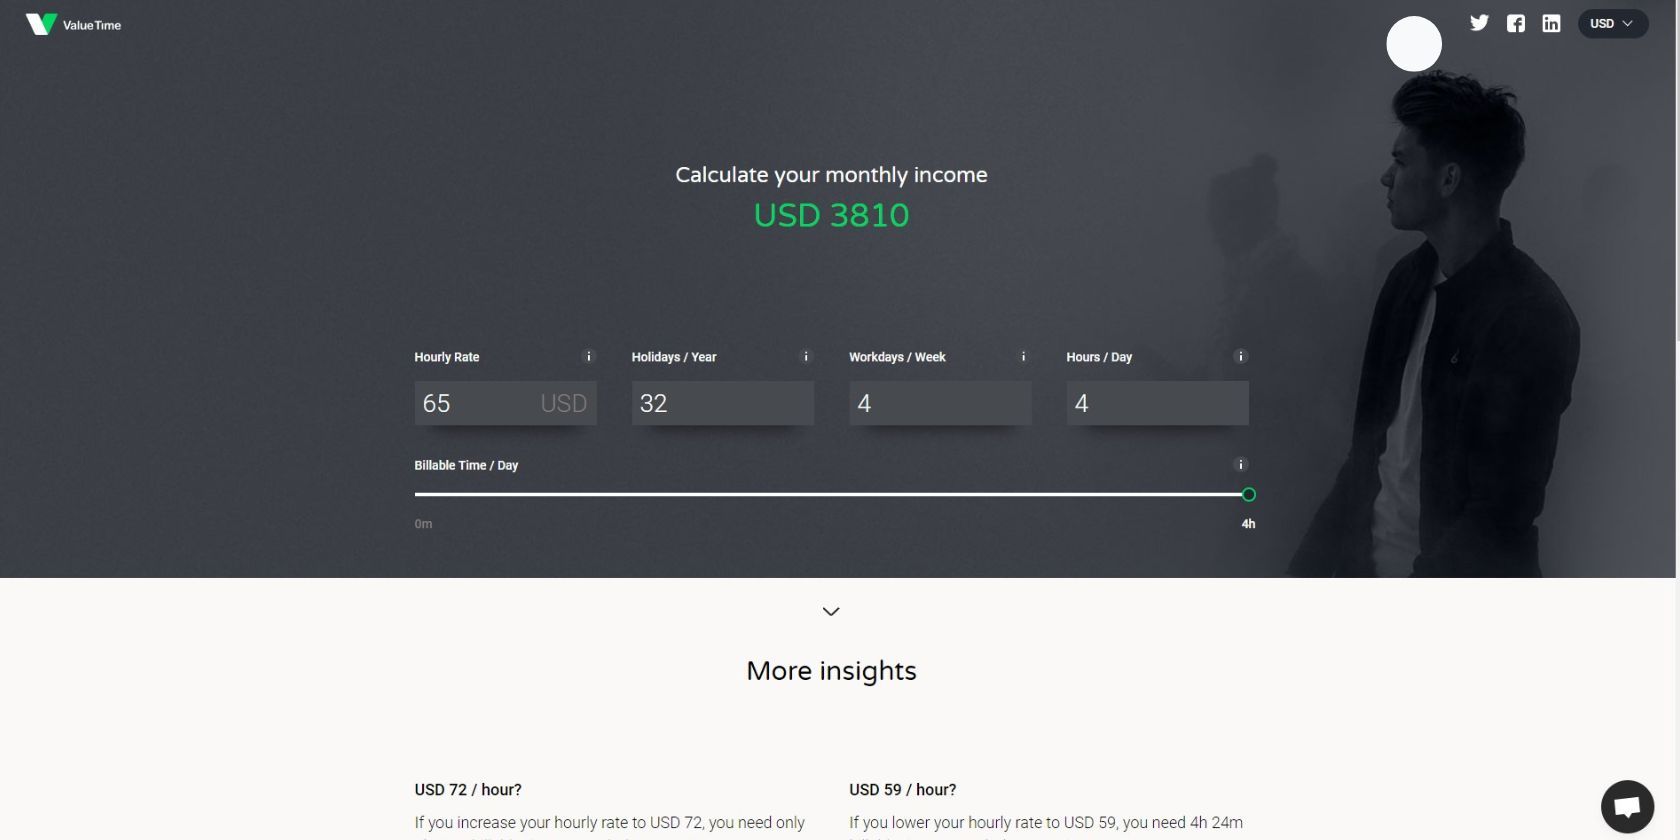 ValueTime Monthly Income Calculator for freelancers